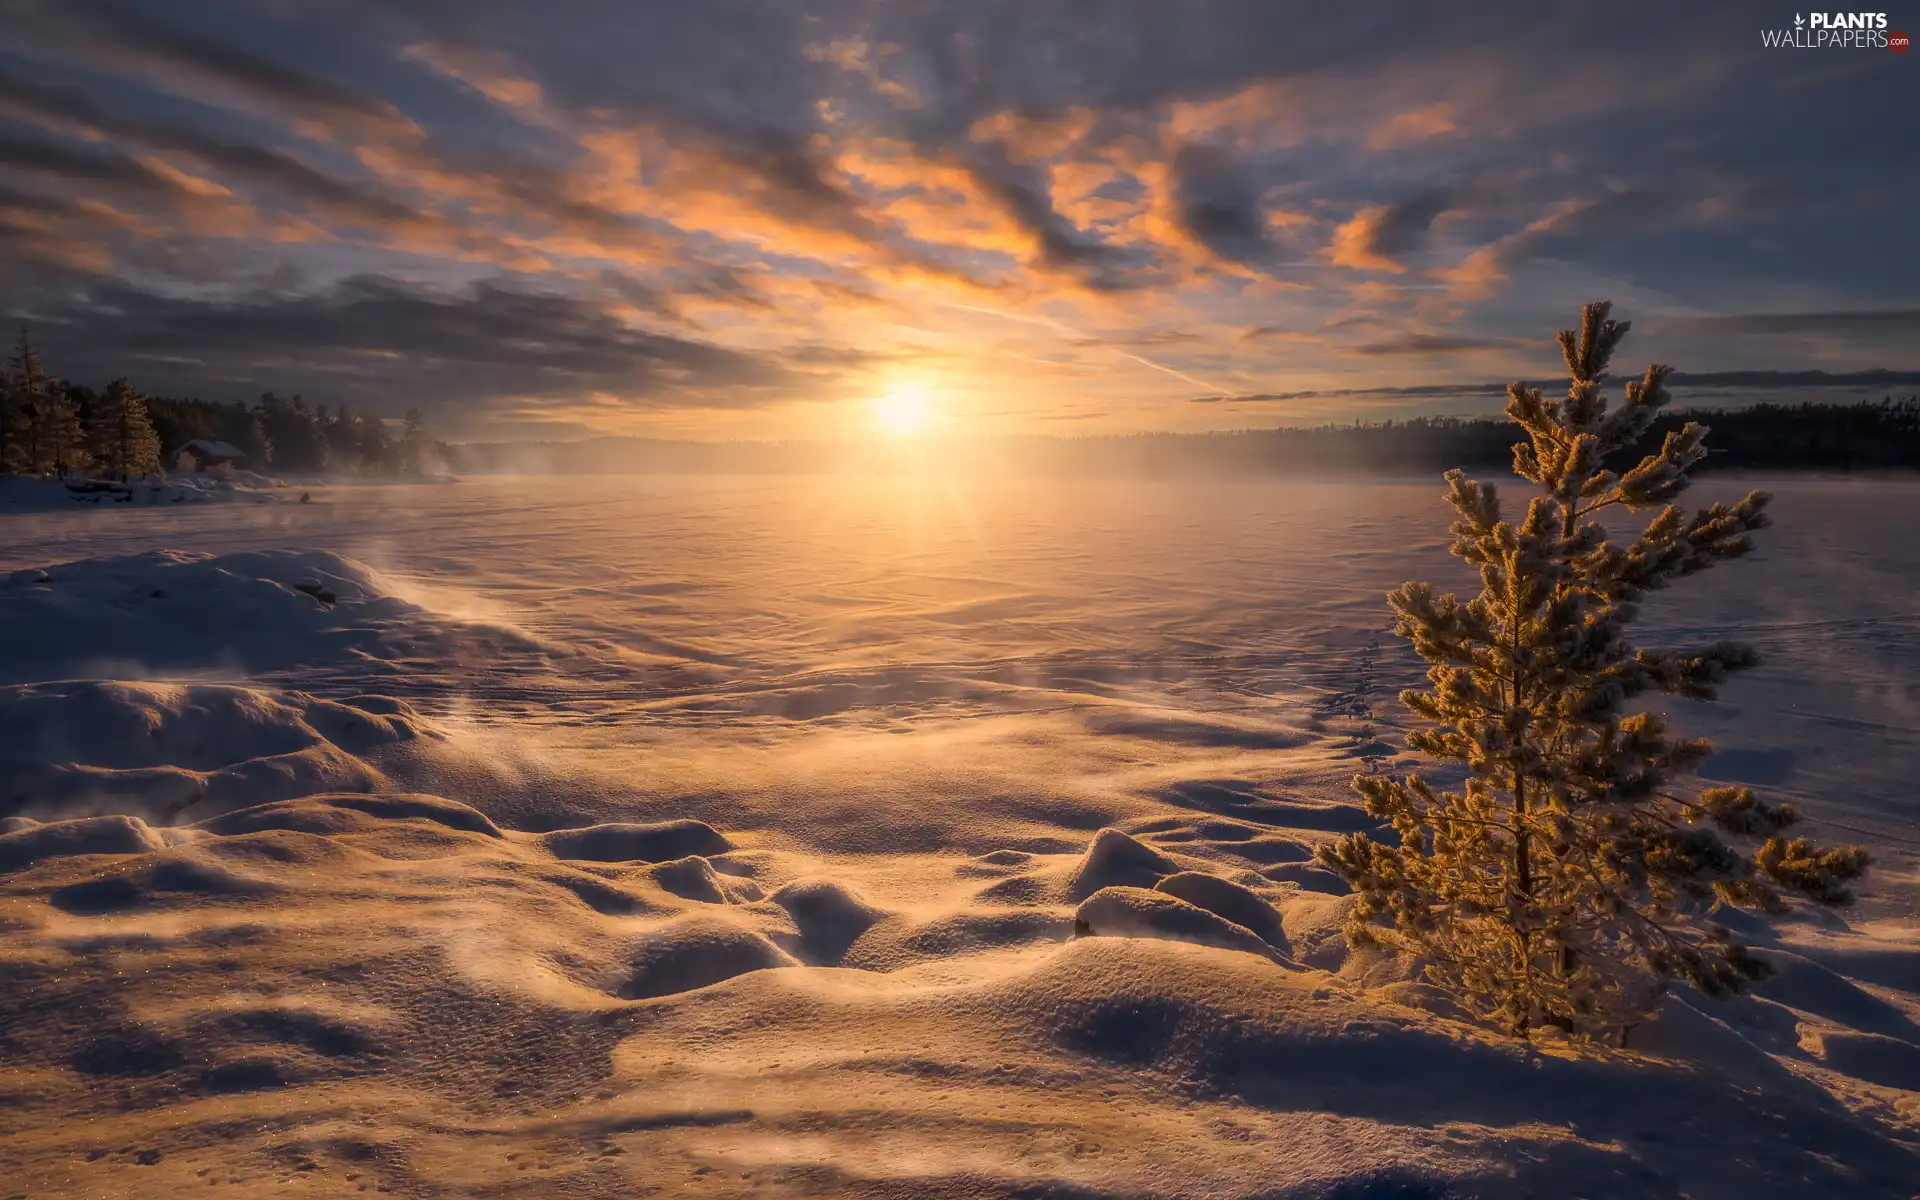 Snowy, snow, Ringerike, Great Sunsets, winter, trees, Norway